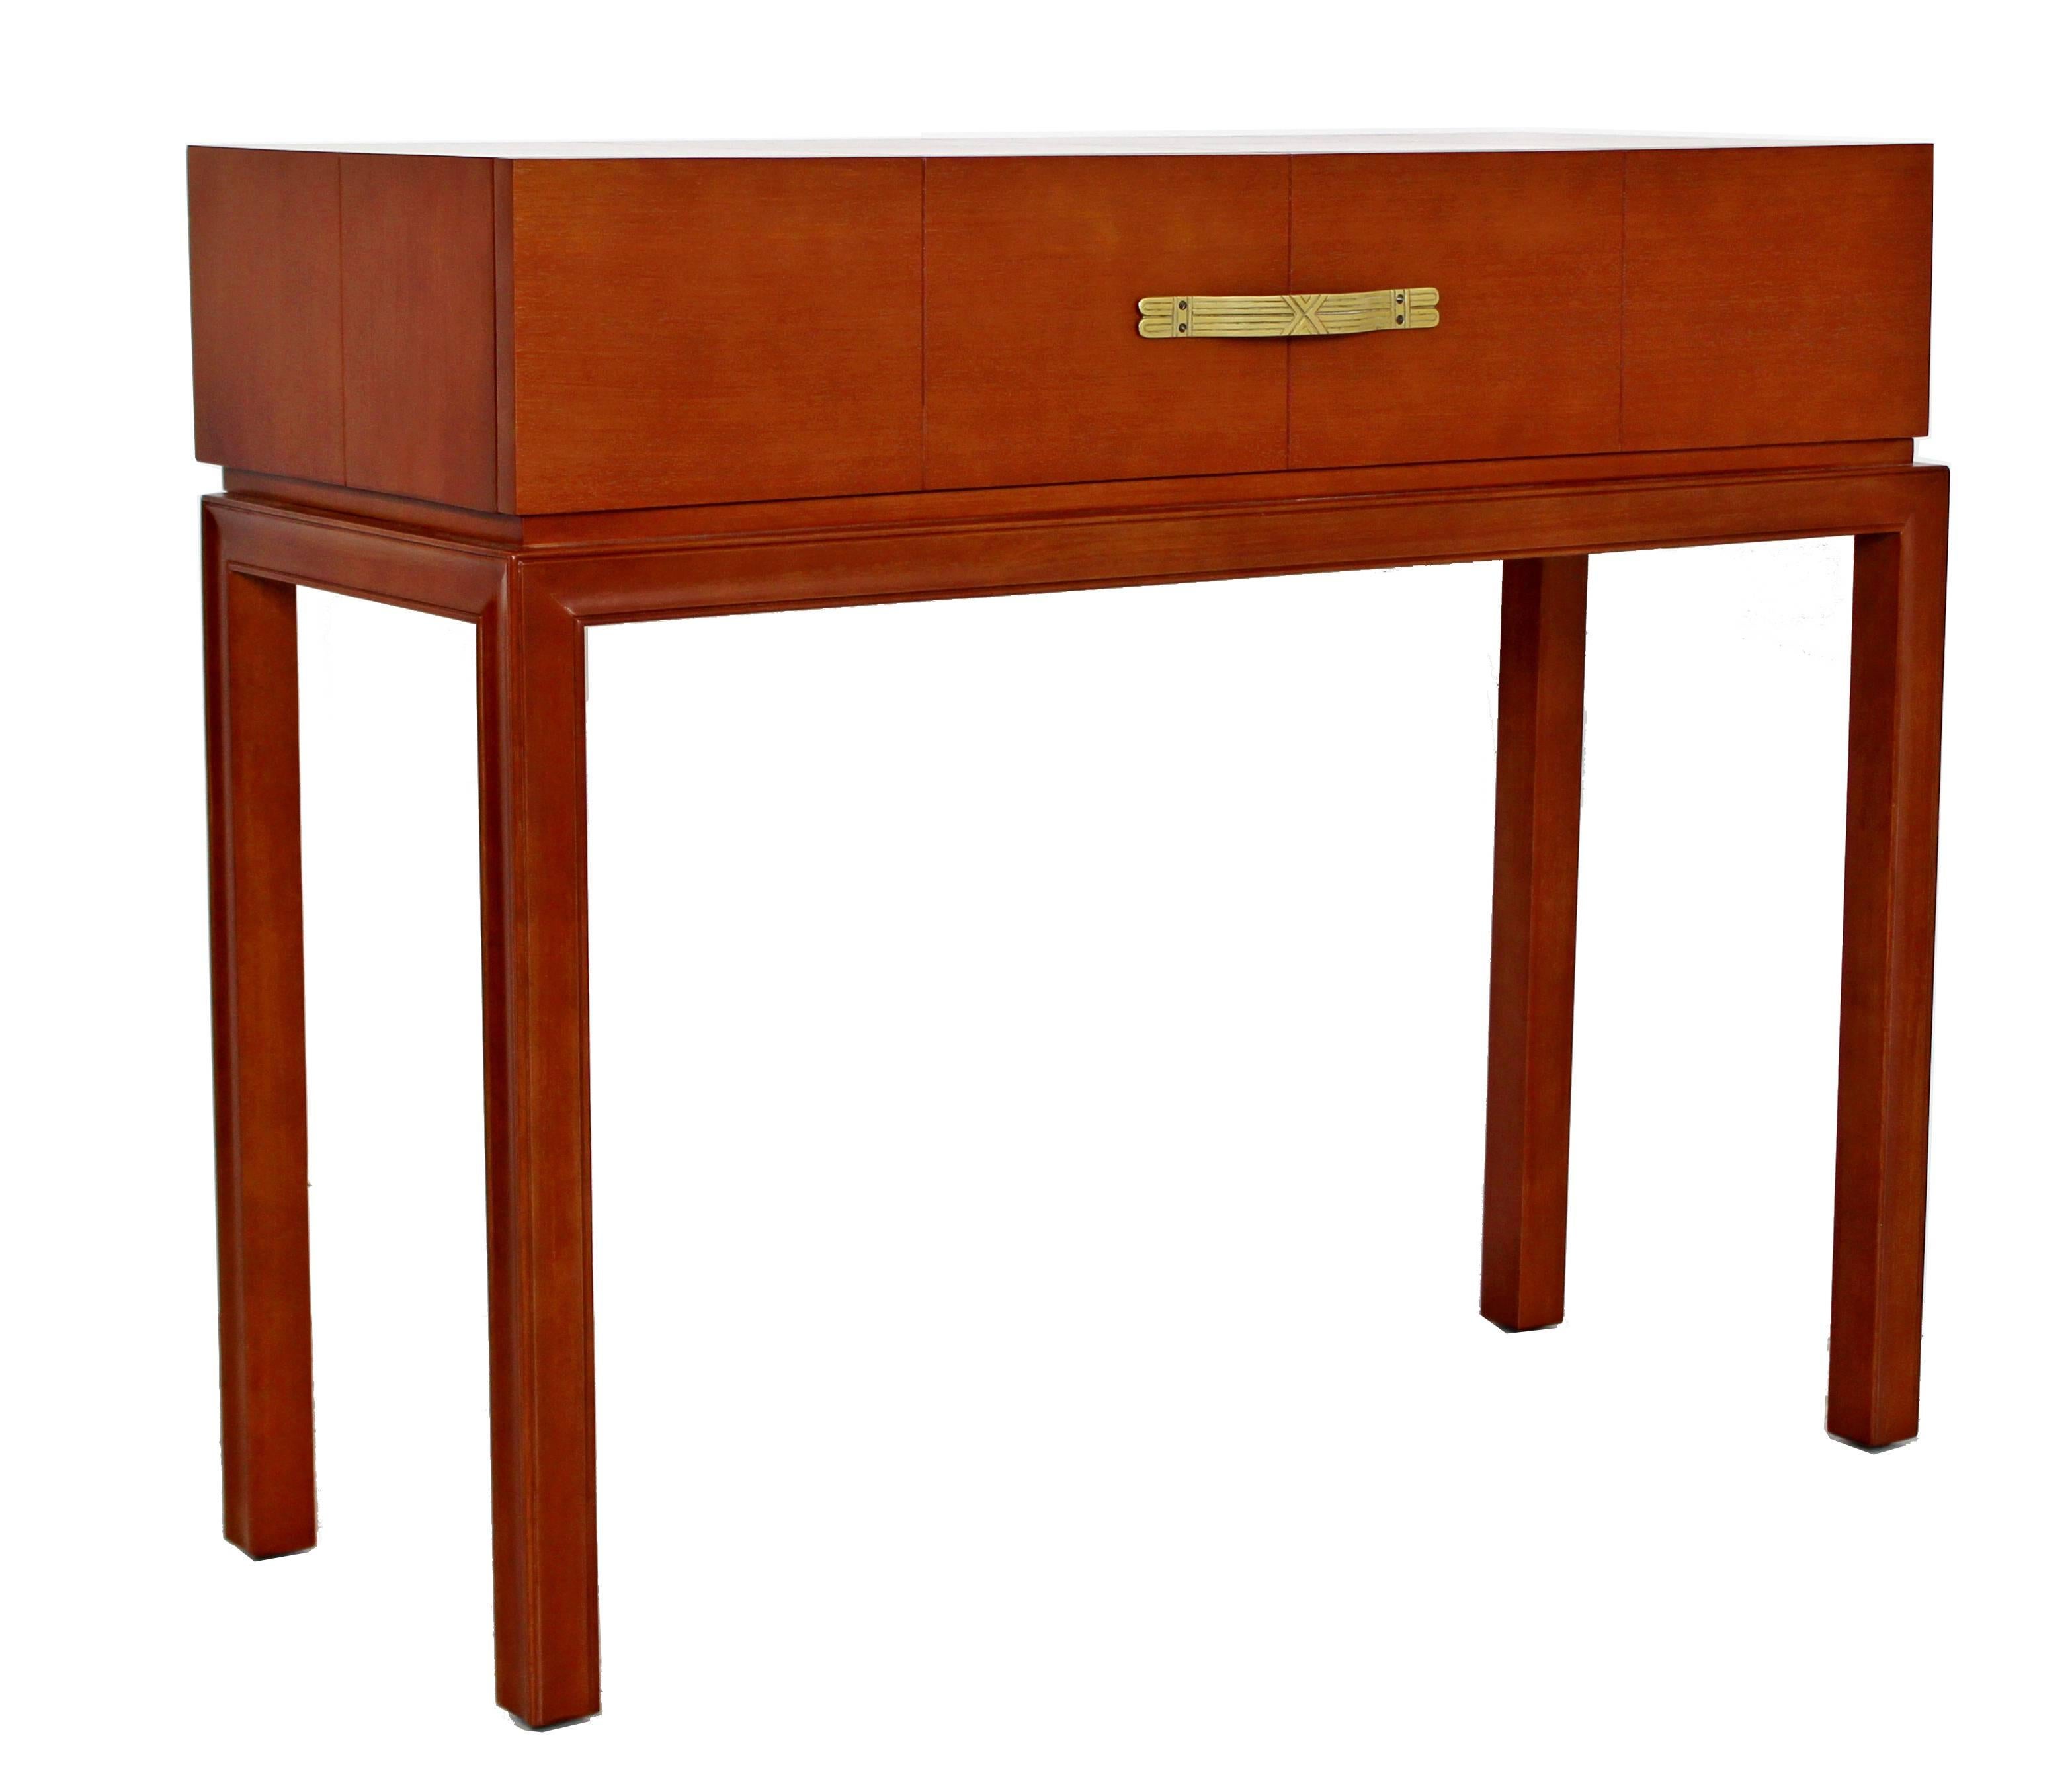 For your consideration is an absolutely stunning console table, with one drawer that has a bronze pull, by Tommi Parzinger for Charak Modern, circa 1950s. In excellent condition, just came back from being professionally refinished. The dimensions